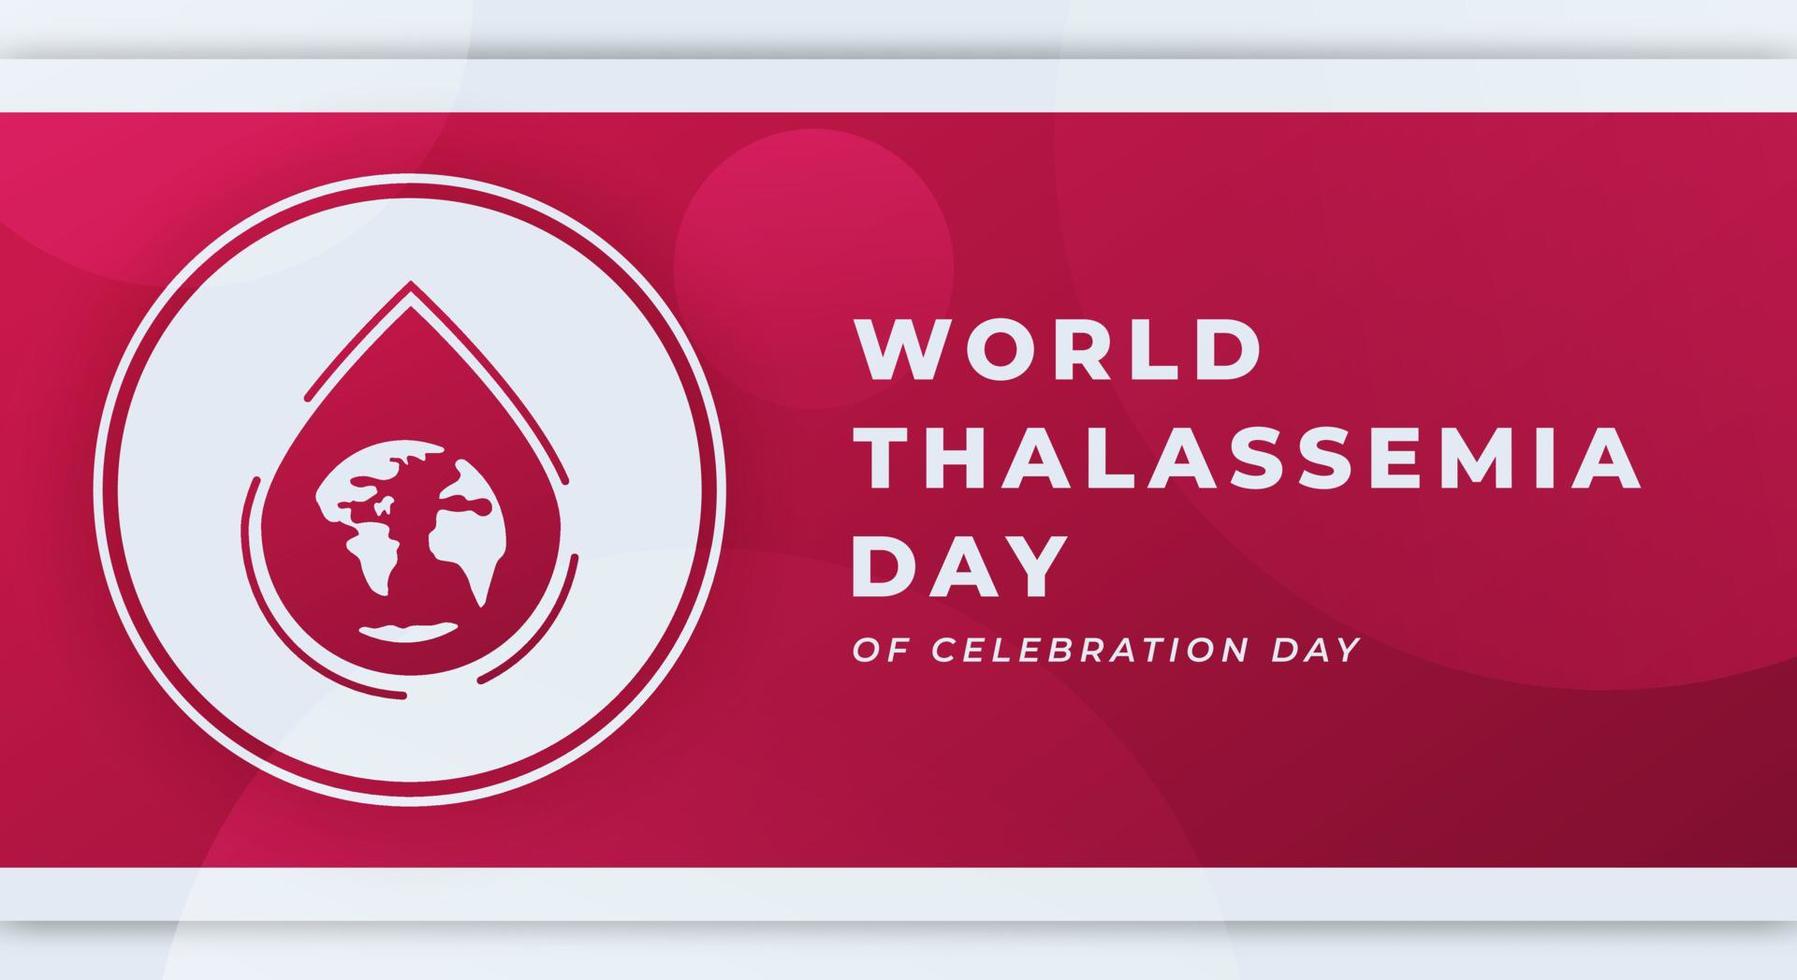 Happy World Thalassemia Day Celebration Vector Design Illustration for Background, Poster, Banner, Advertising, Greeting Card